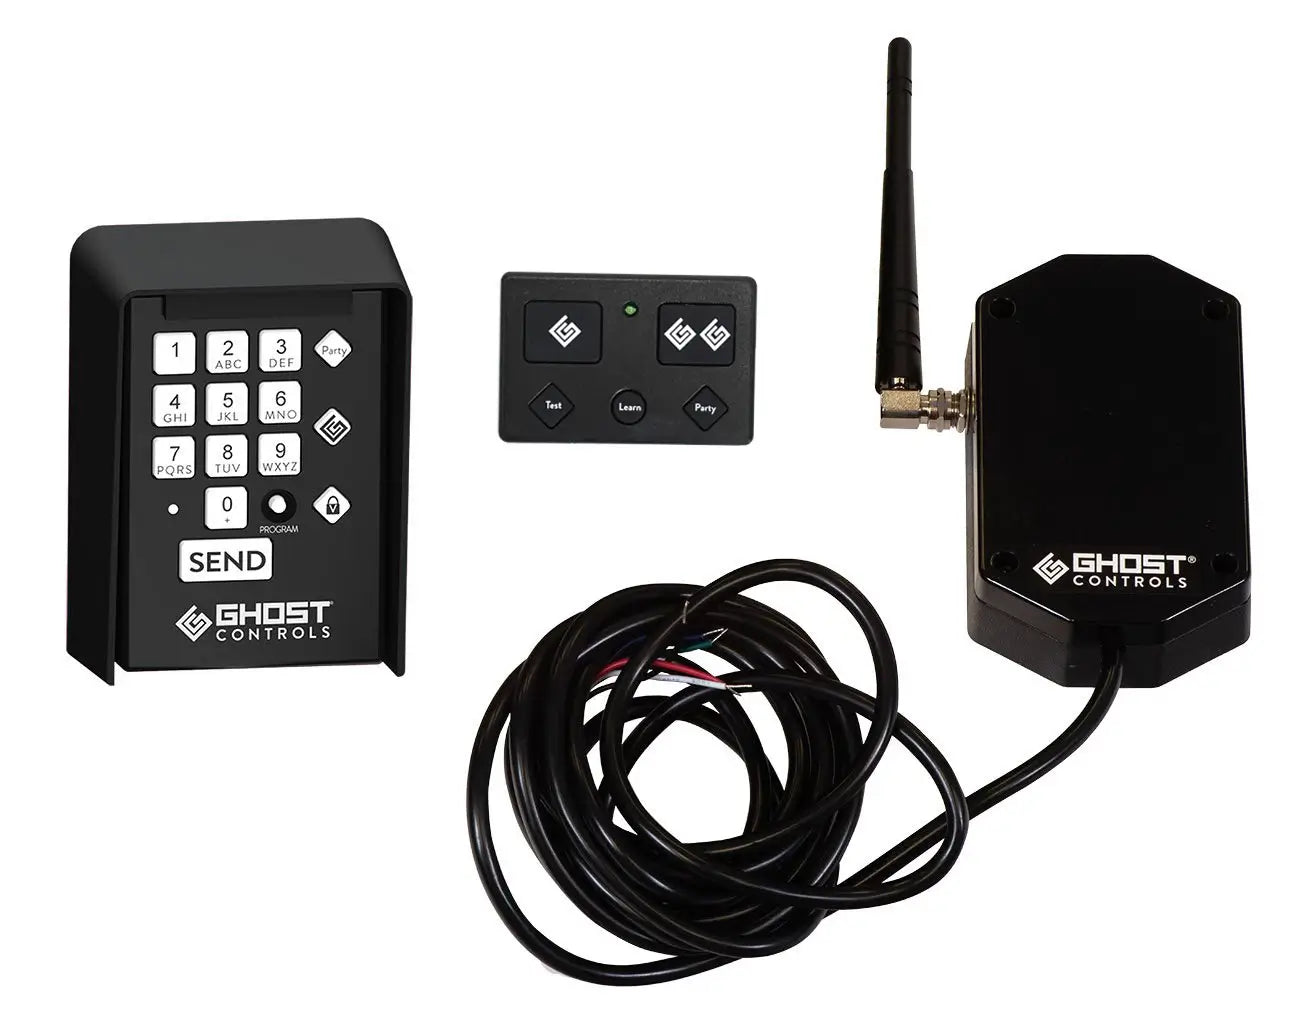 Universal Receiver Kit for ghost controls features on a competitors automatic gate system